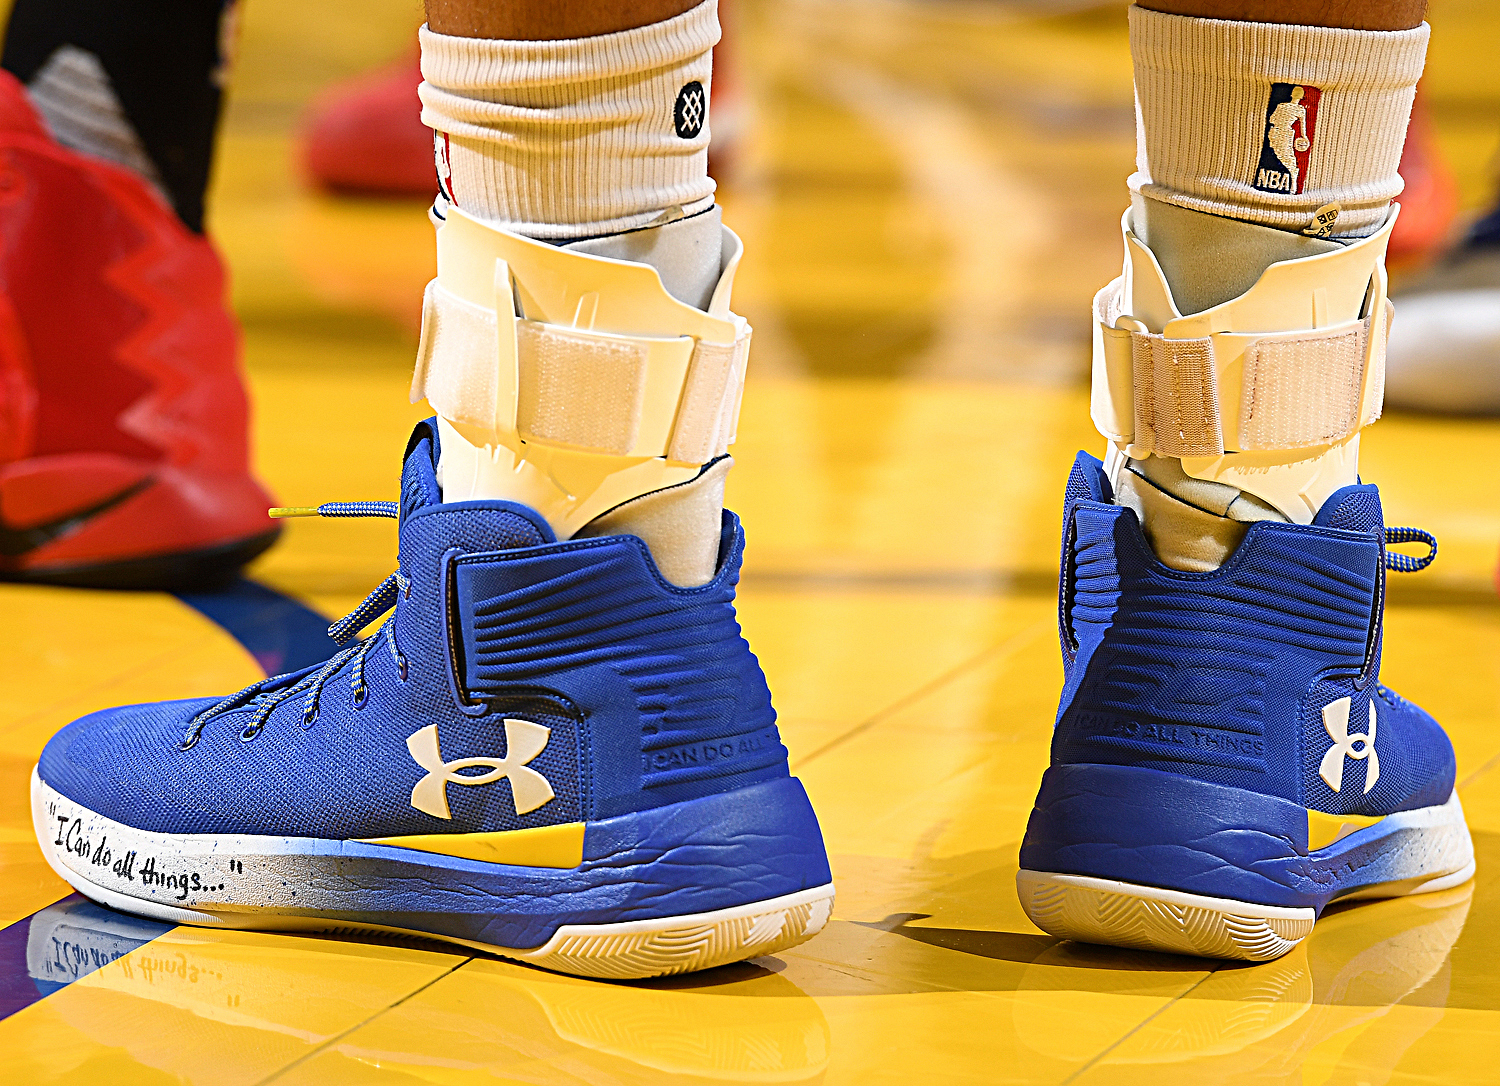 curry verse on shoes